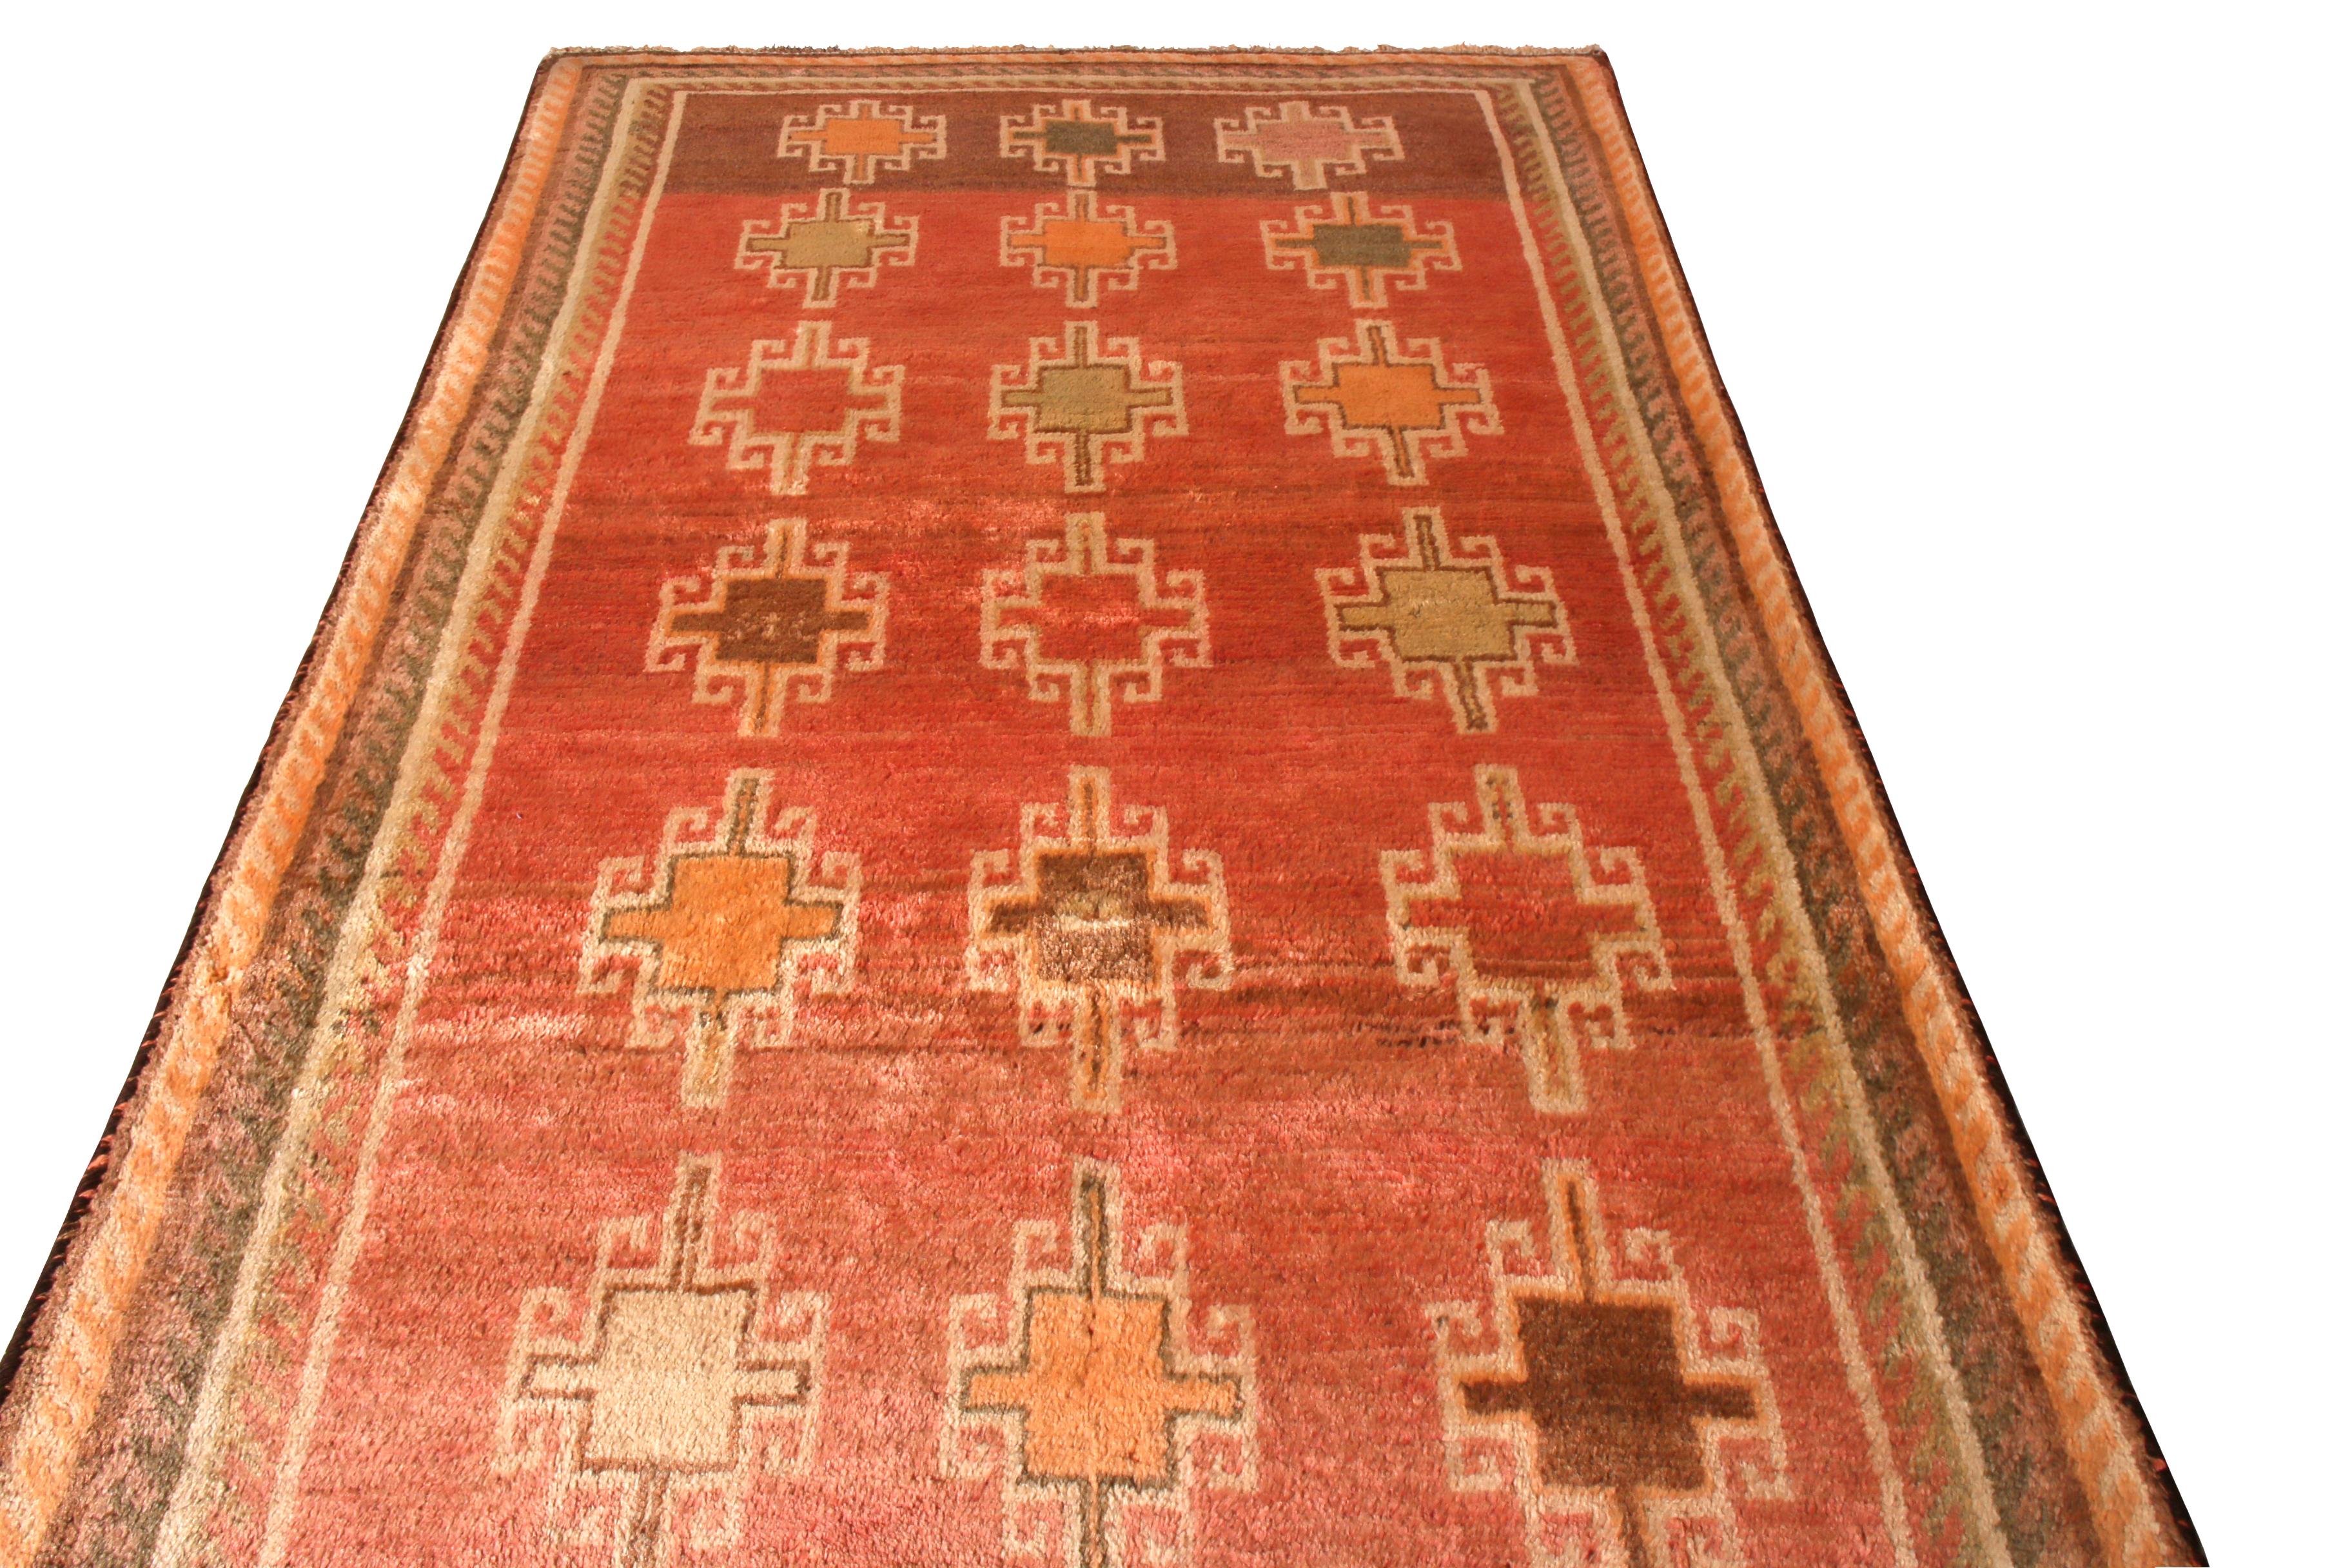 Hand knotted in wool originating from Persia, circa 1910-1920, this antique Persian rug enjoys a unique coral red-orange colorway seldom seen in this extent, complementing a particularly lustrous, lush pile height it boasts as a gabbeh tribal rug.